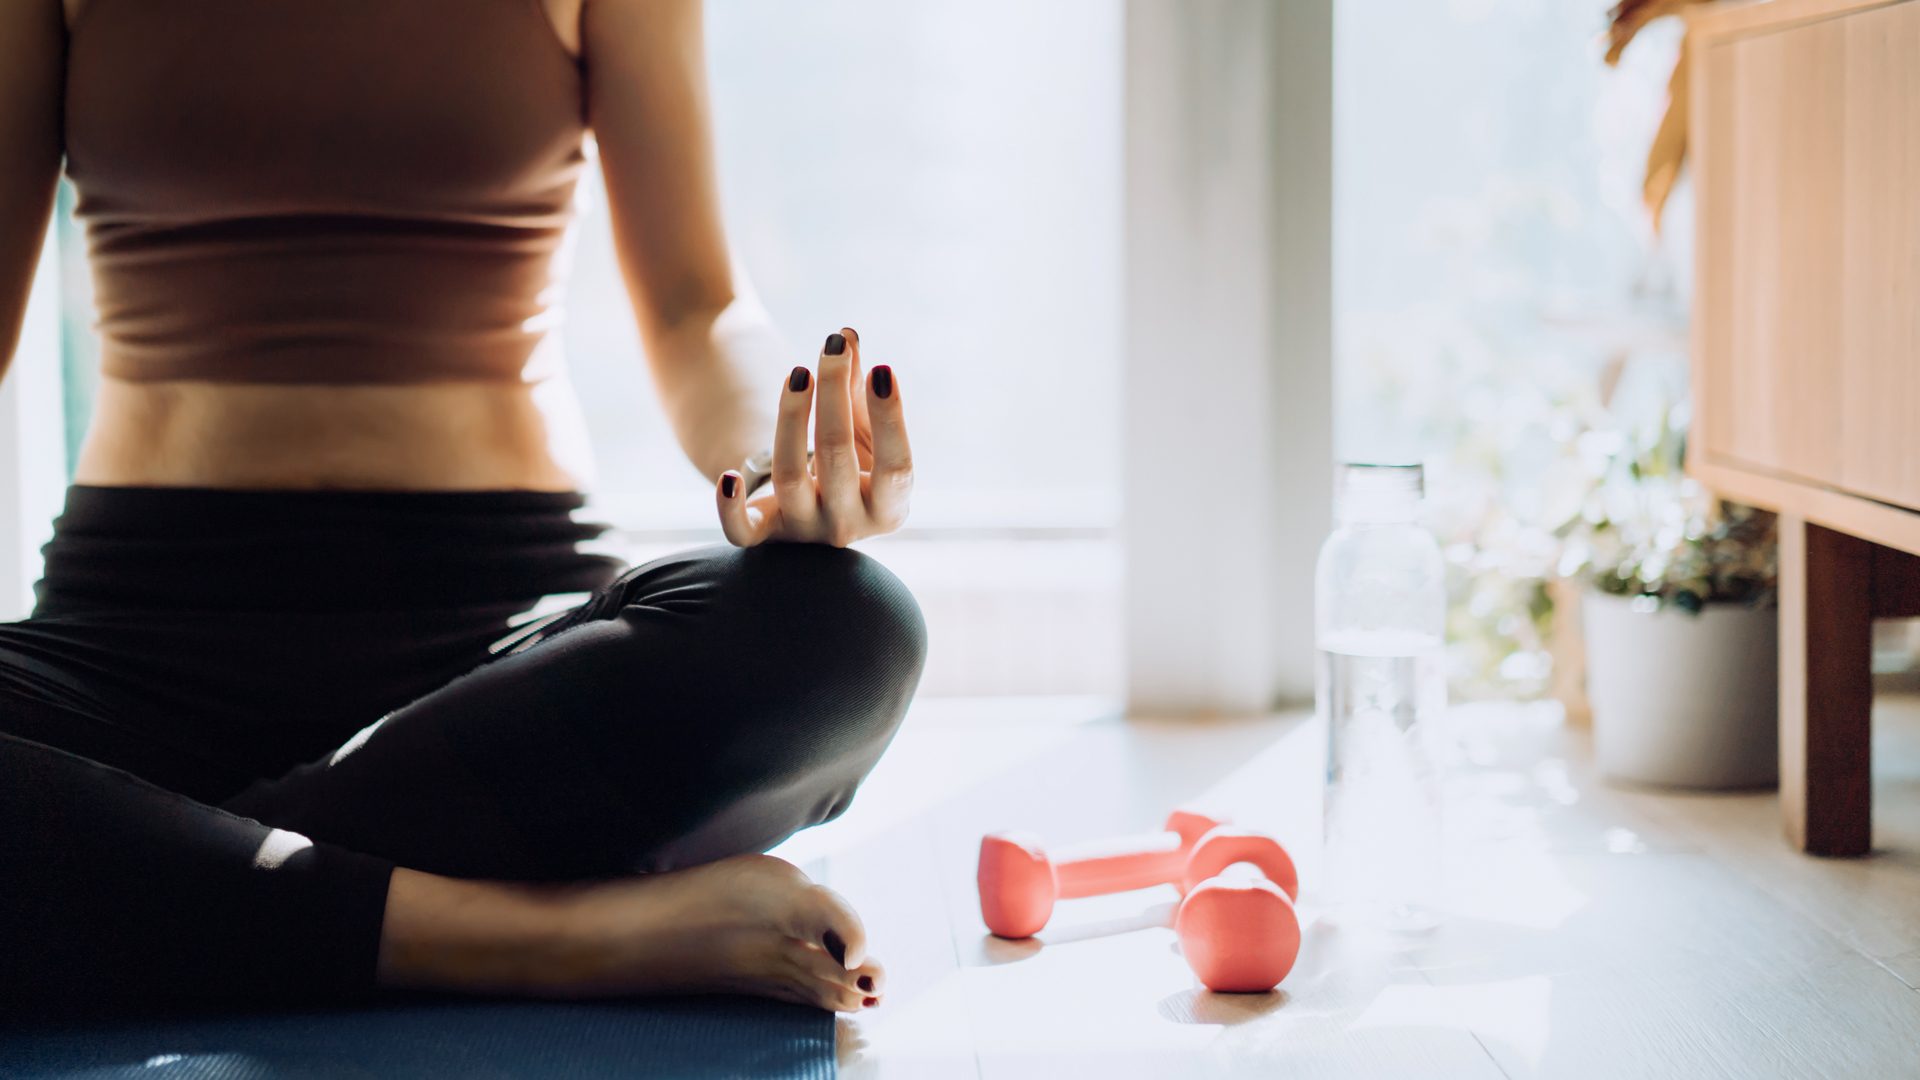 Can Yoga Help With Weight Loss?